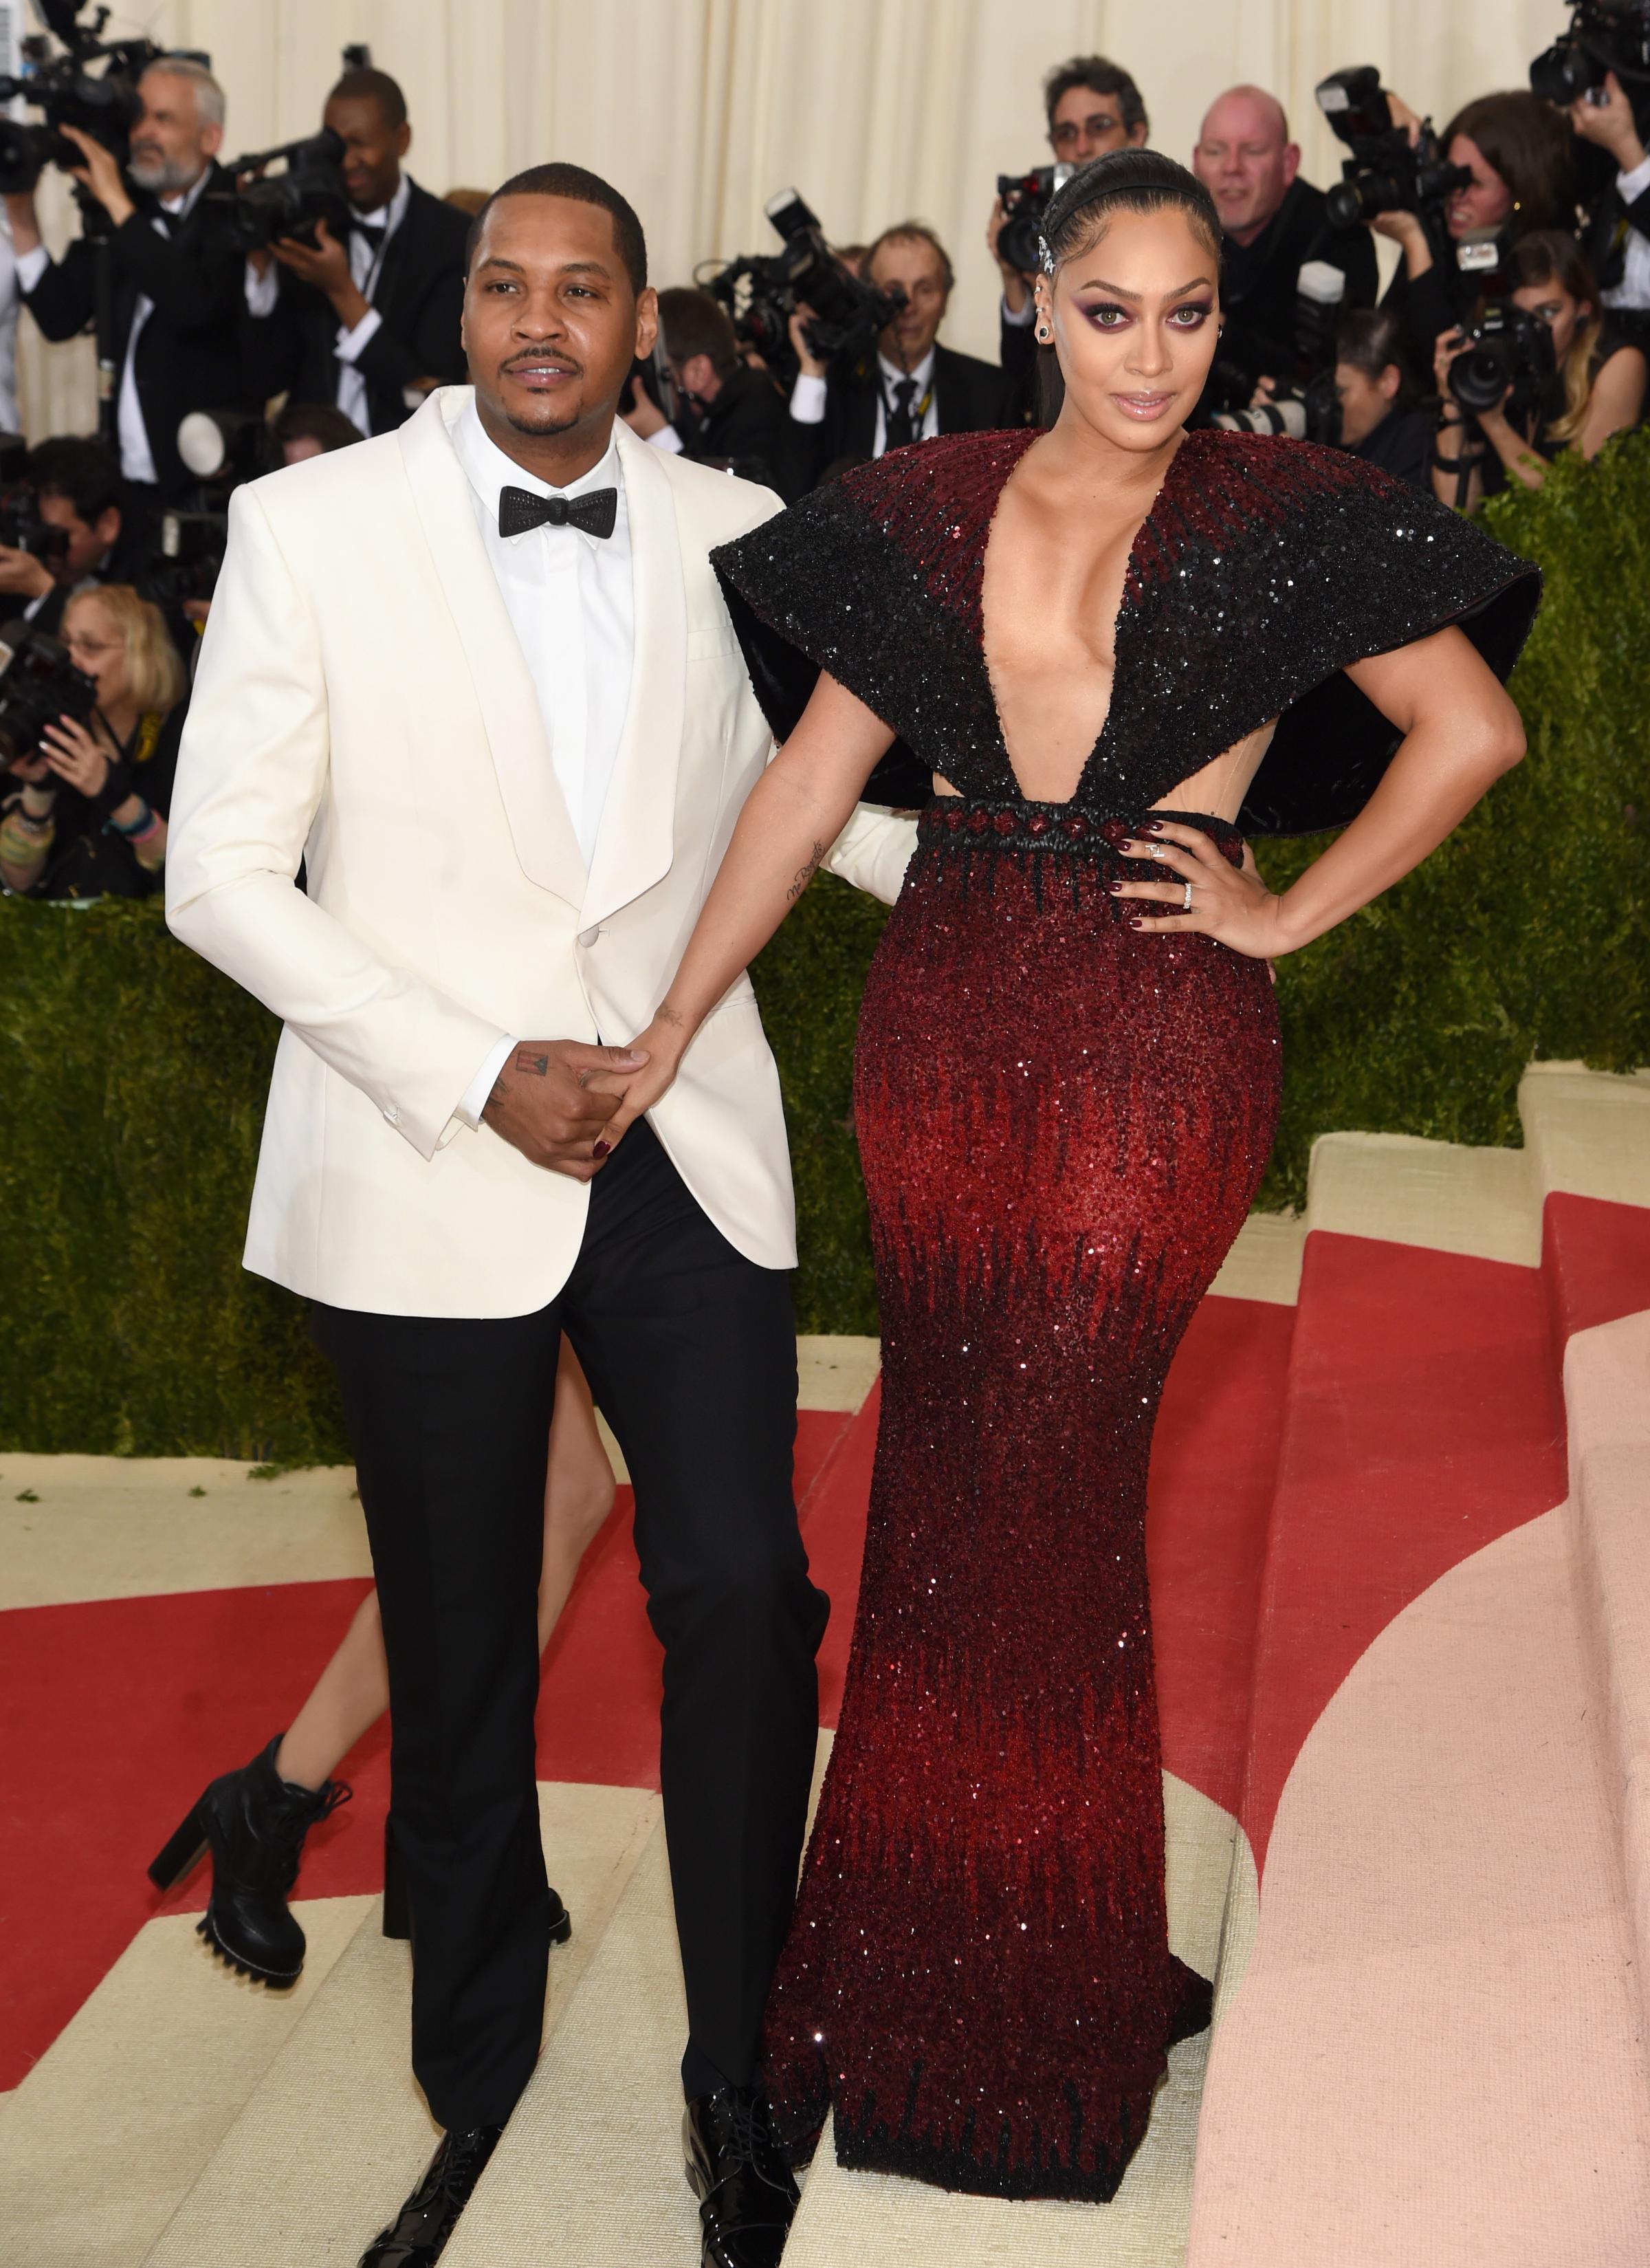 Carmelo Anthony and La La Anthony attend "Manus x Machina: Fashion In An Age Of Technology" Costume Institute Gala at Metropolitan Museum of Art on May 2, 2016 in New York City.